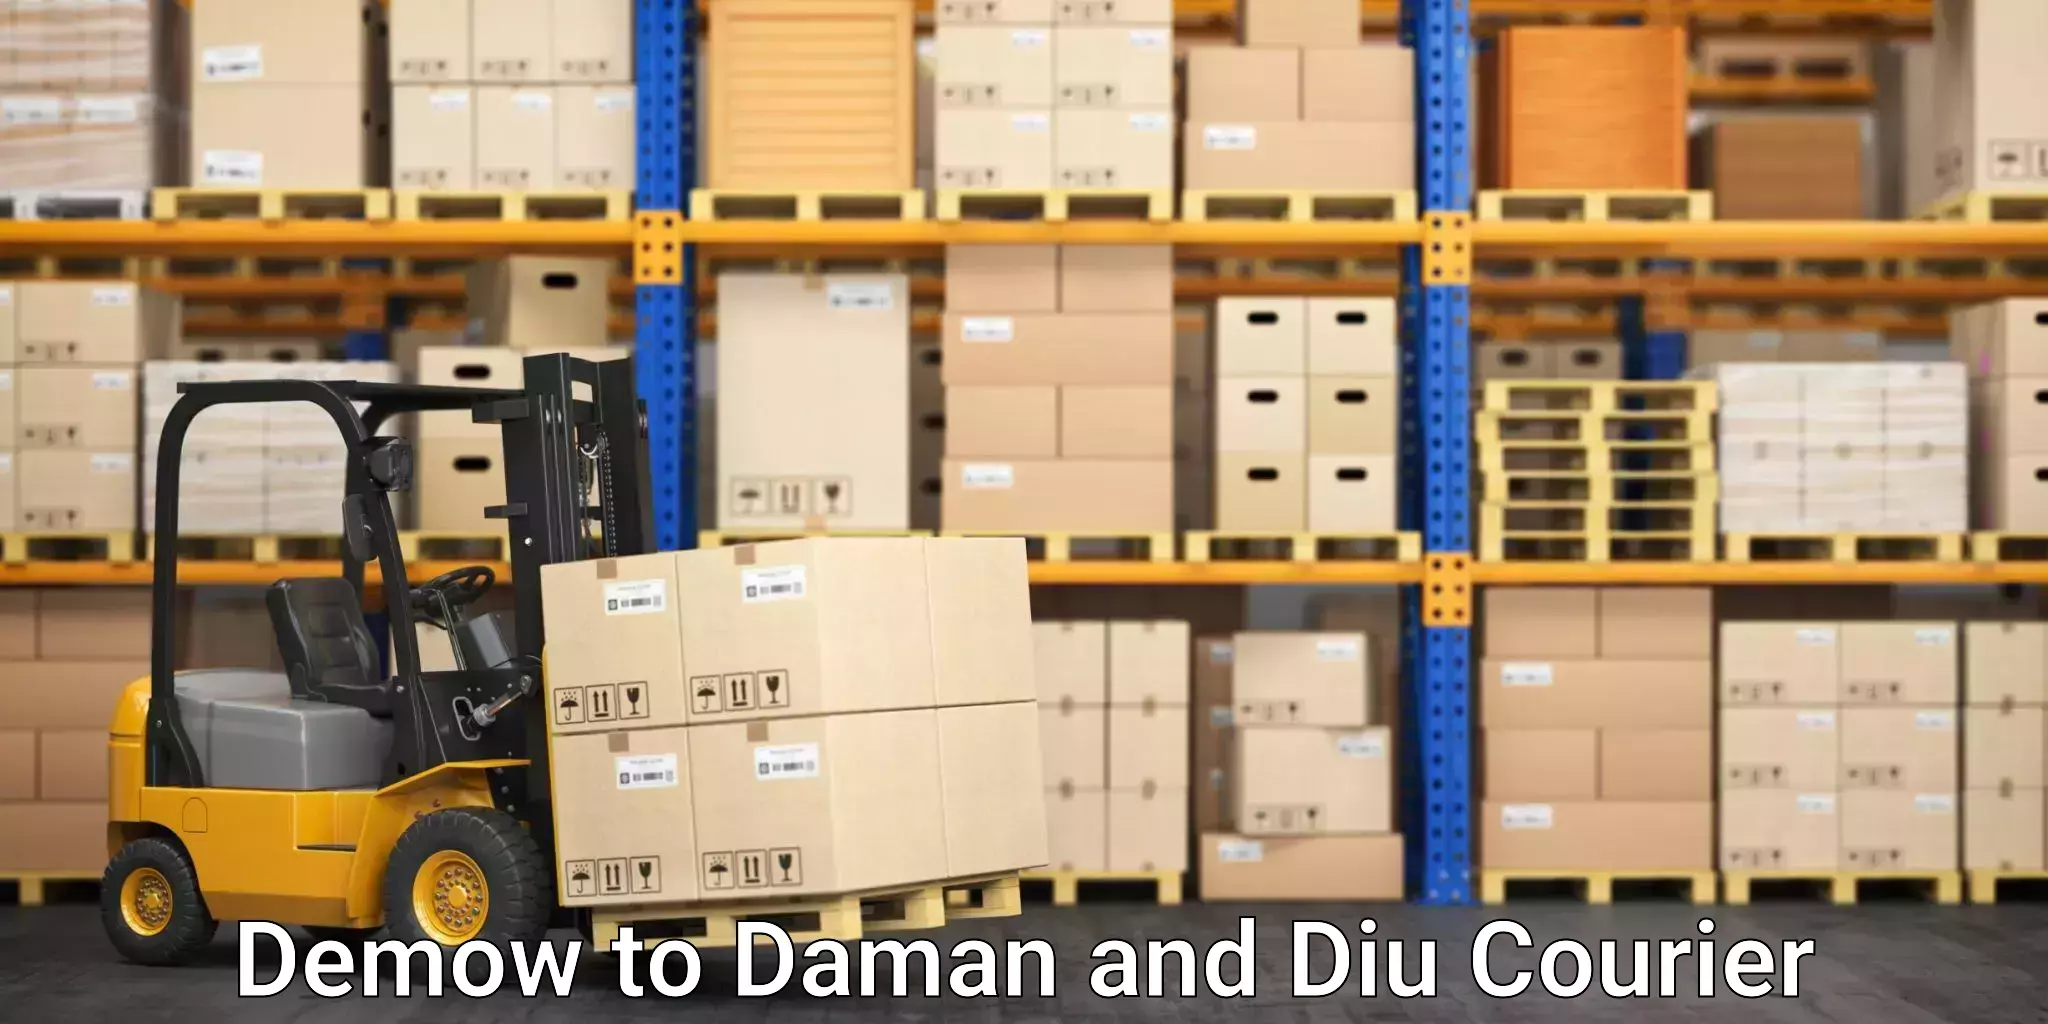 Multi-service courier options Demow to Daman